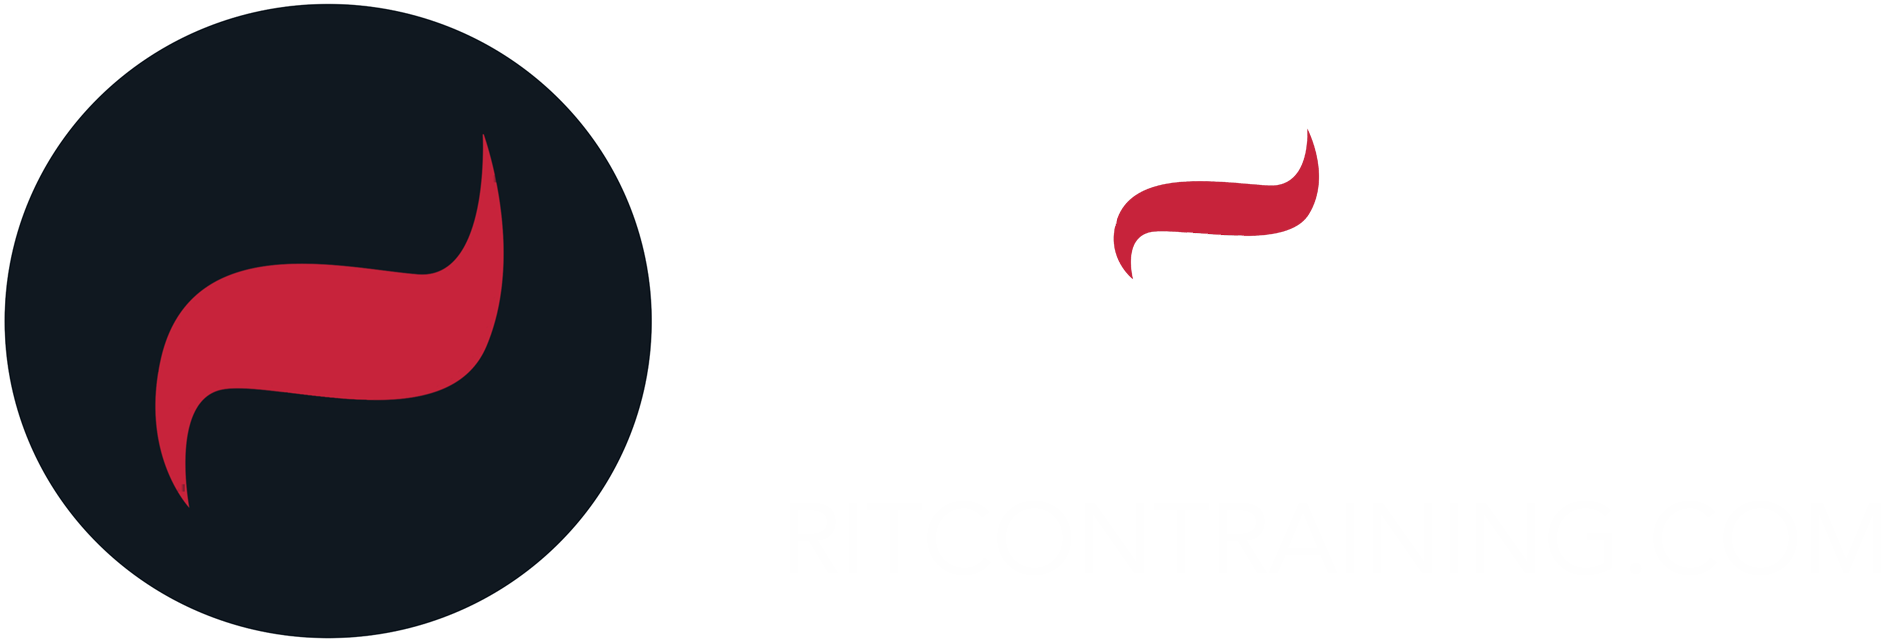 Ritcon Training and Disaster Services